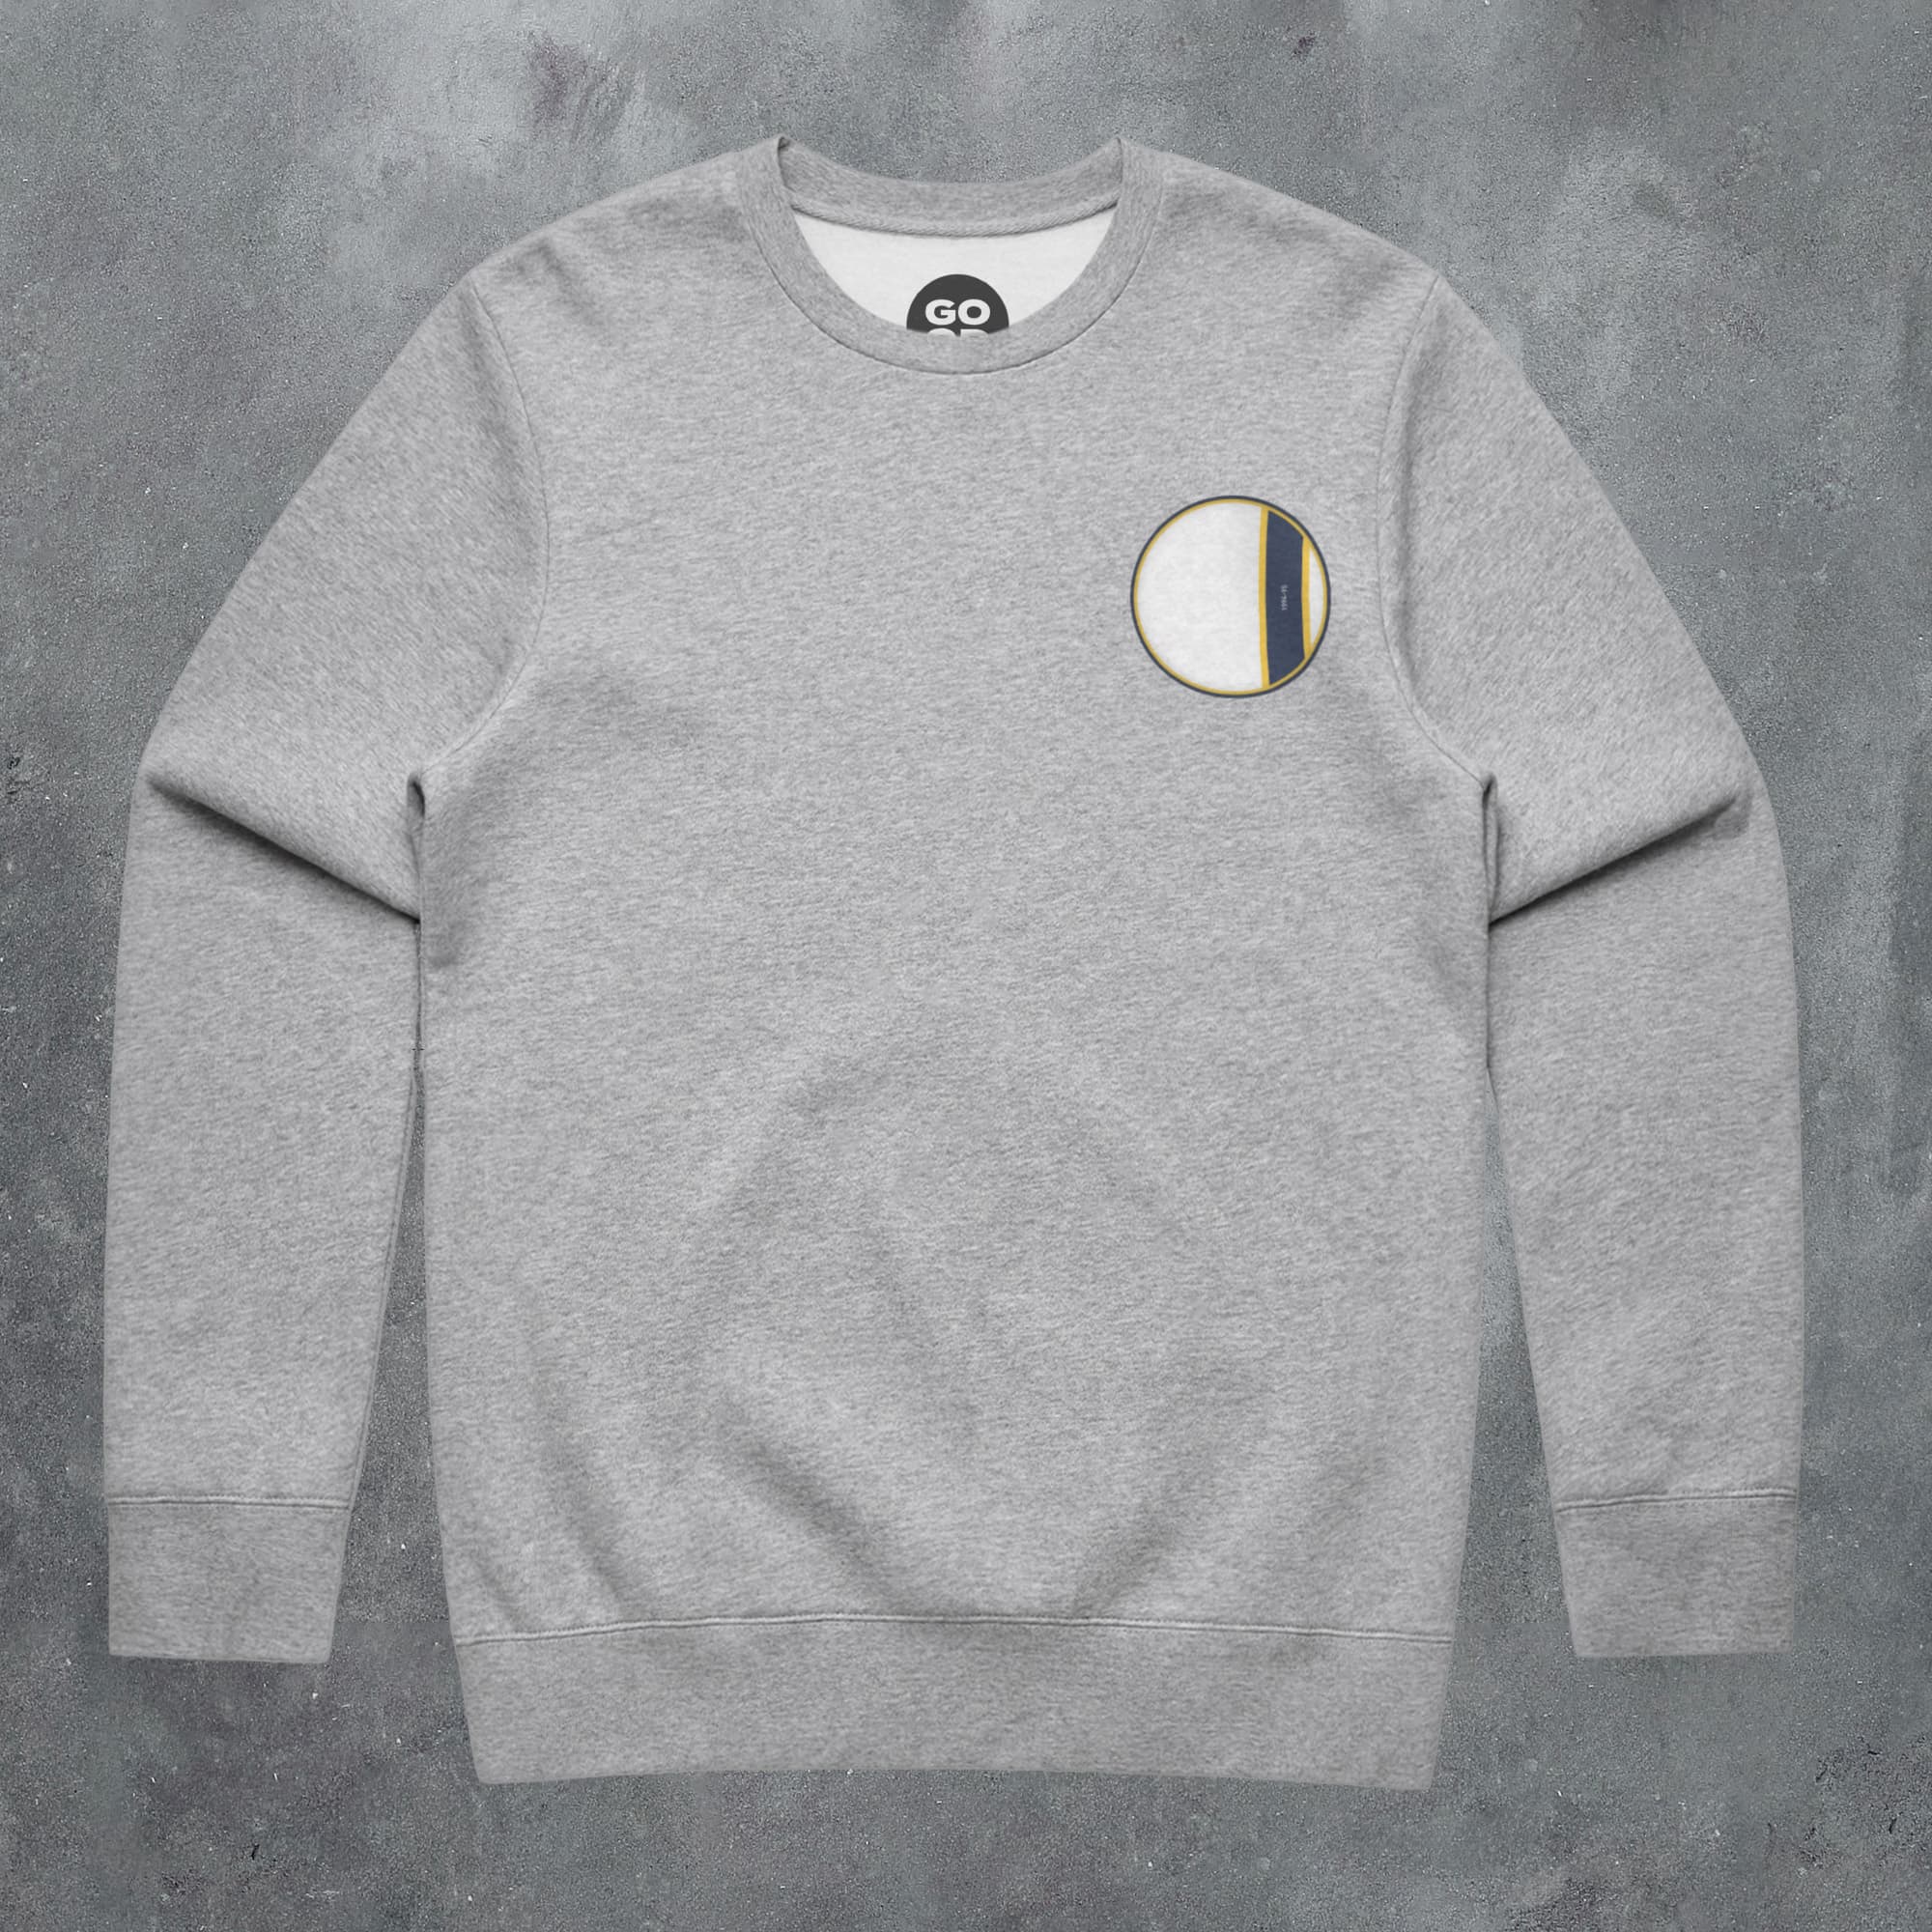 a grey sweatshirt with a white and yellow patch on the chest